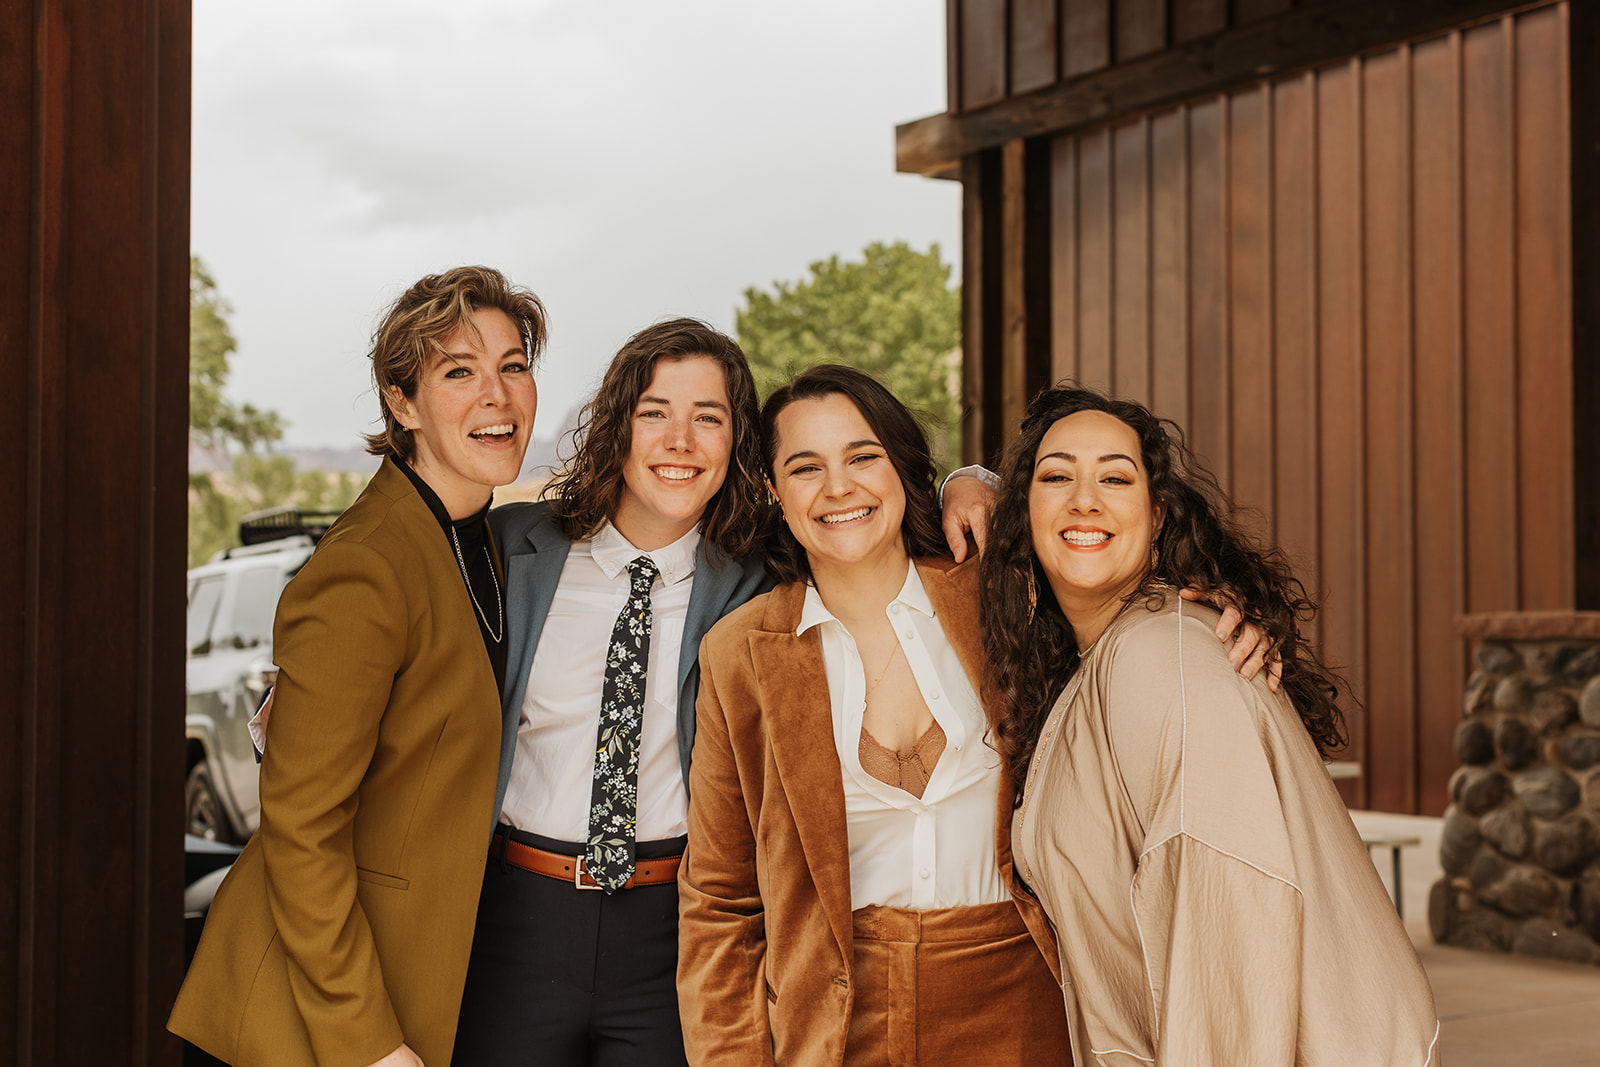 Four women gathered for a group photo in front of a wooden building 